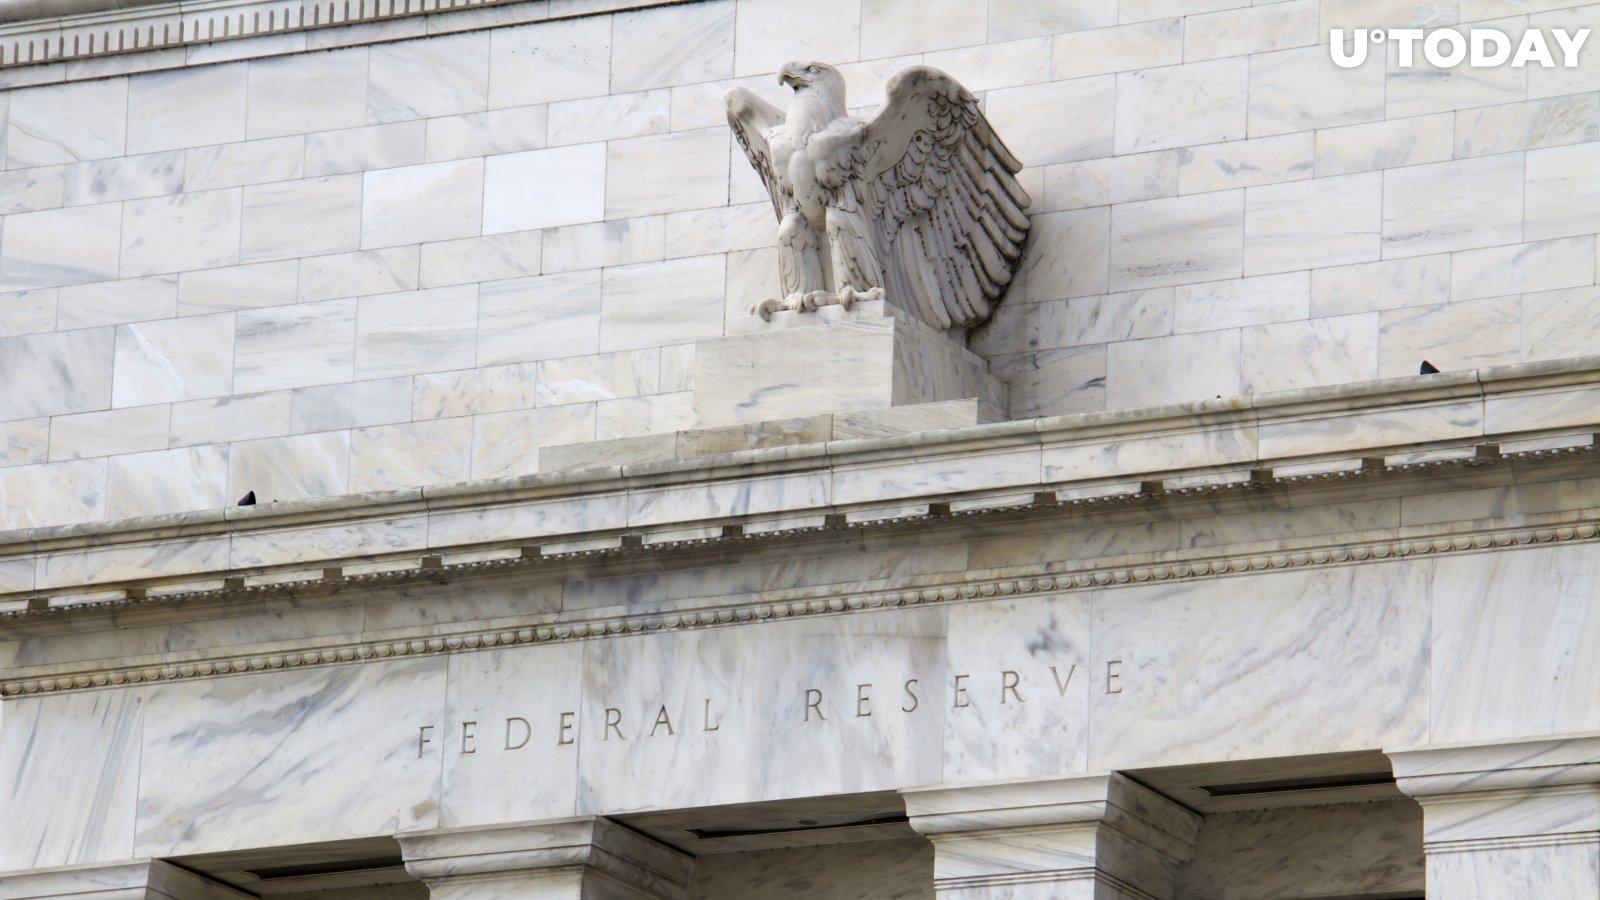 Bitcoin's Novelty Will Fade, According to Top Fed Official 